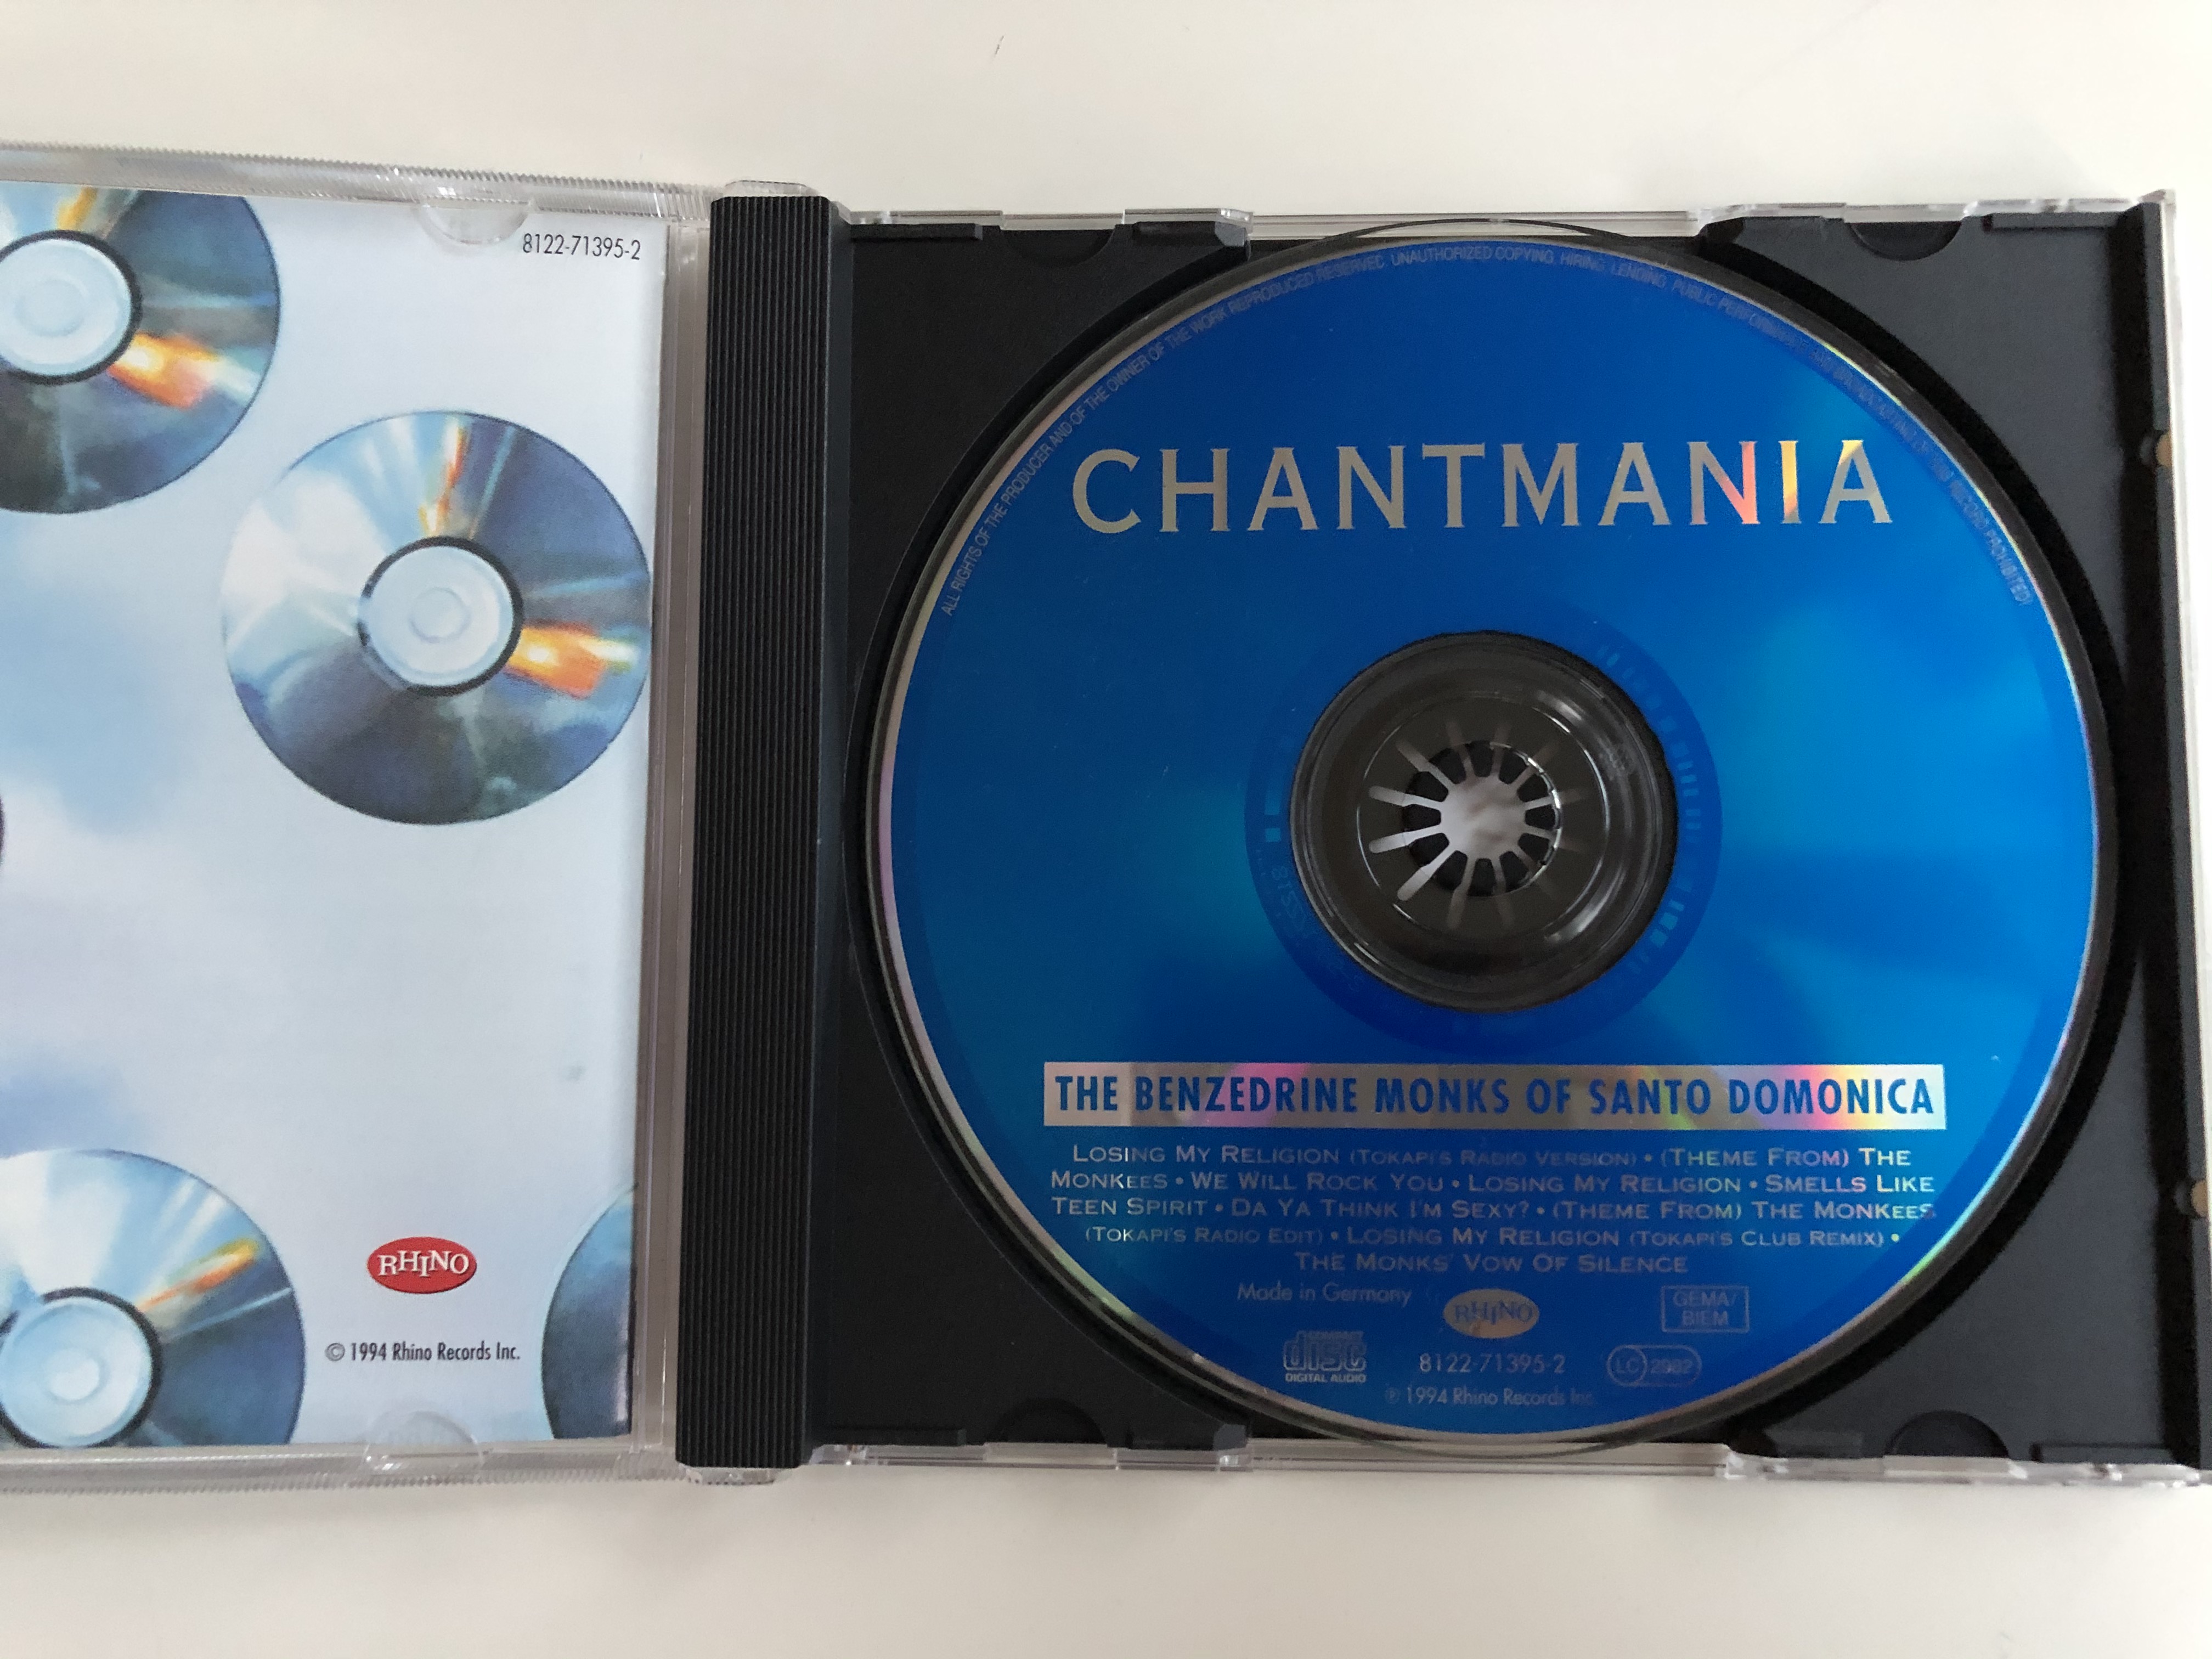 chantmania-the-benzedrine-monks-of-santo-domonica-includes-the-hit-remixes-of-losing-my-religion-plus-2-other-remixes-rhino-records-audio-cd-1994-8122-71395-2-2-.jpg